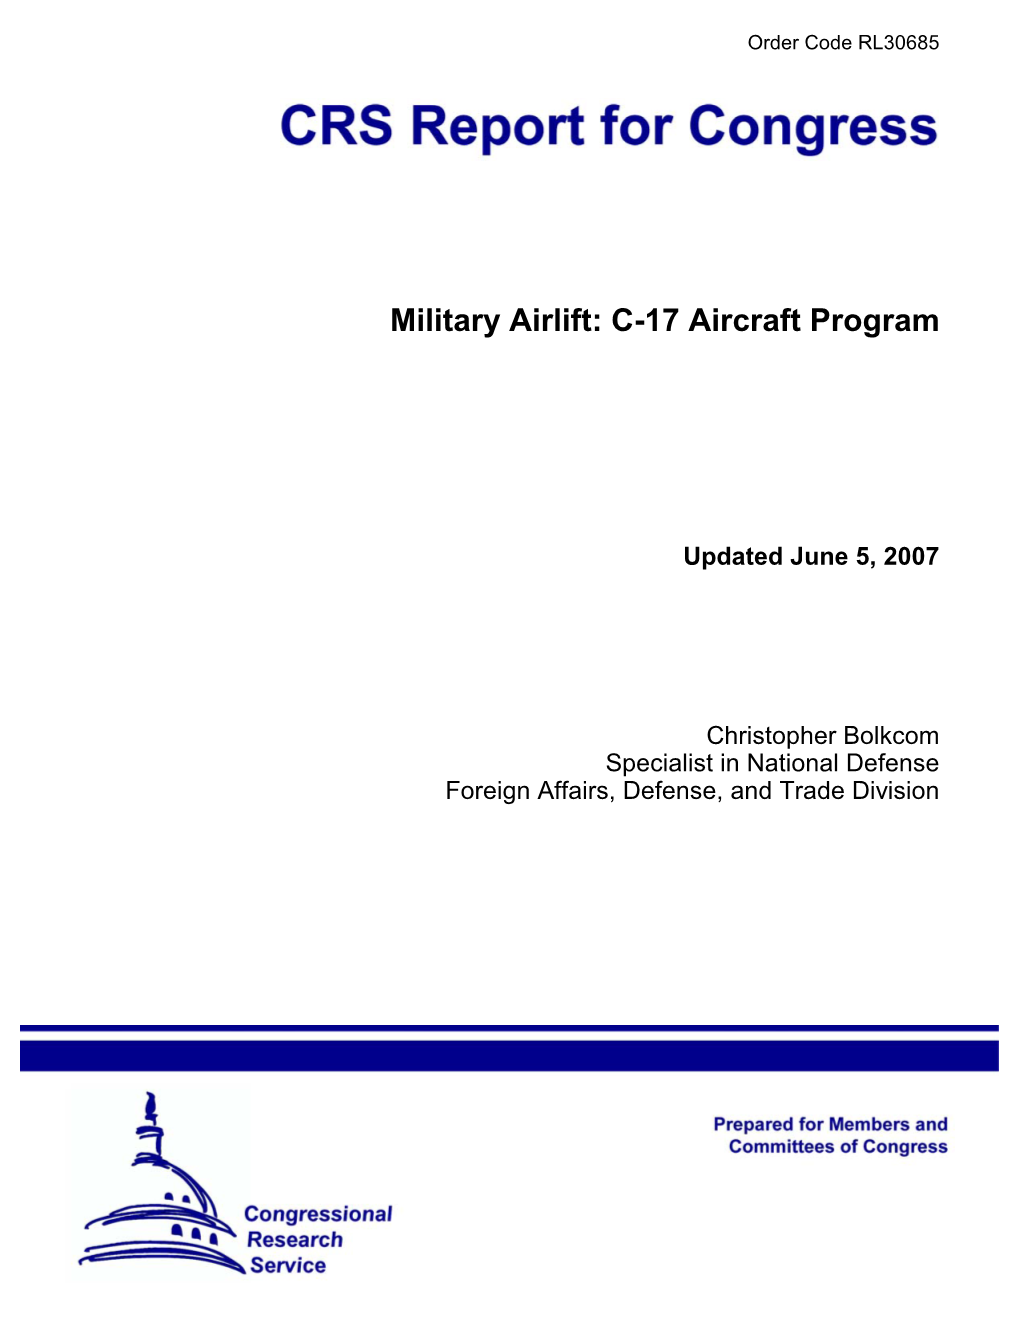 Military Airlift: C-17 Aircraft Program